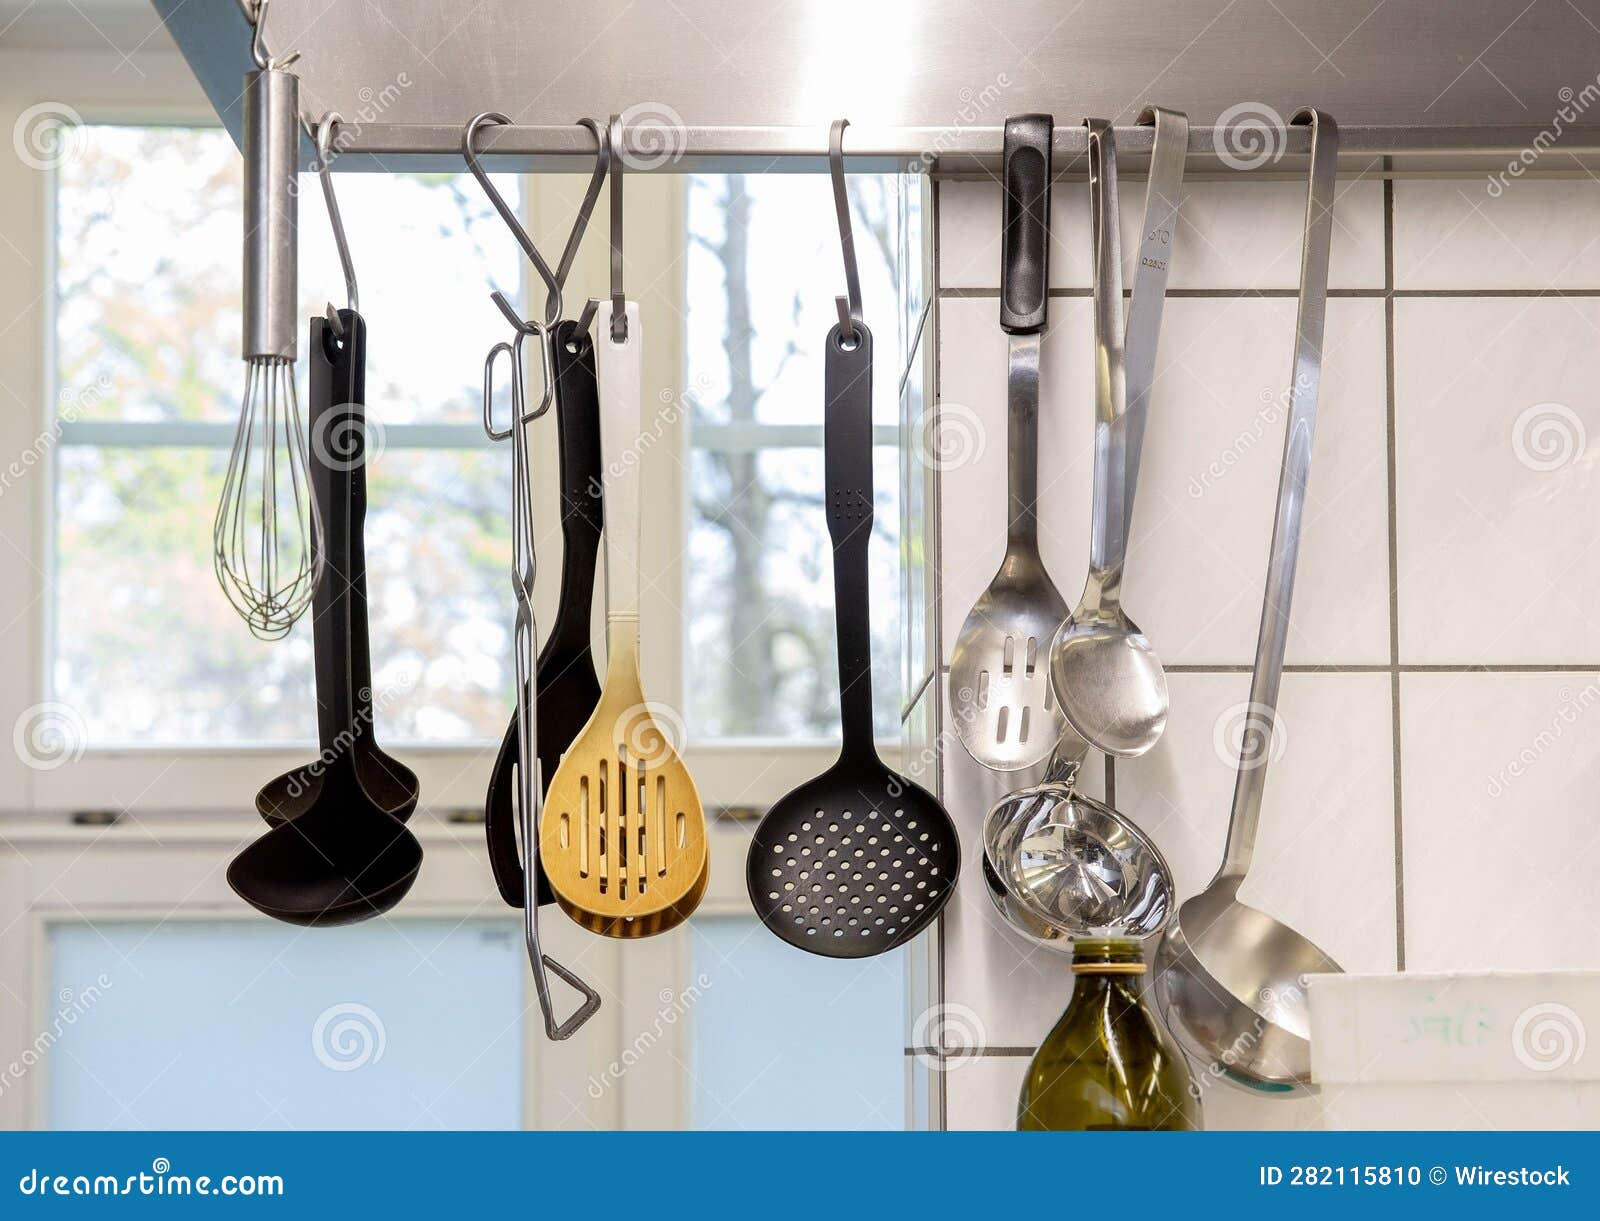 row of decorative spats suspended from the ceiling in a kitchen setting.